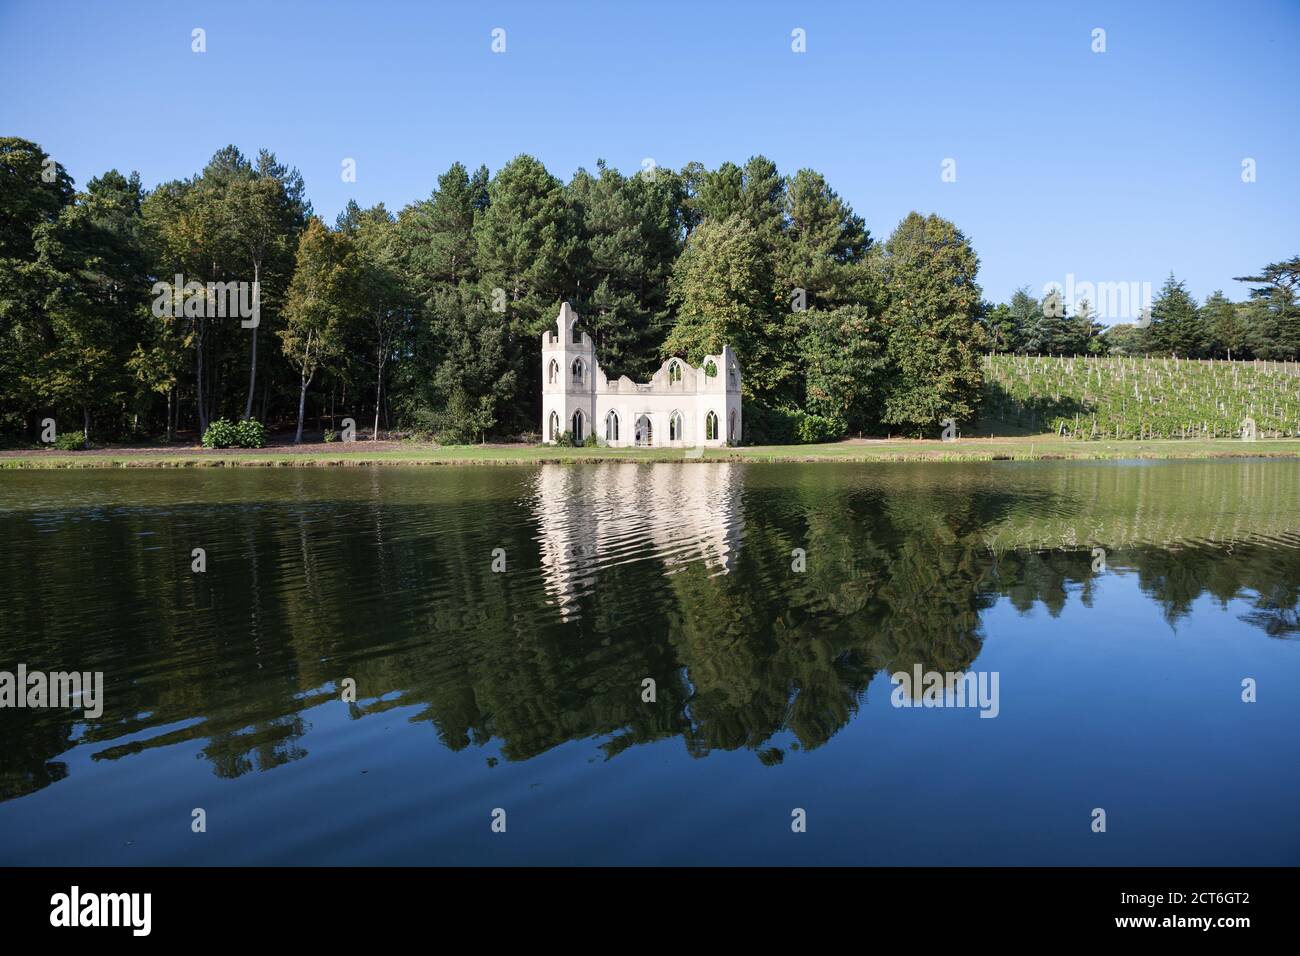 View of the Ruined Abbey from across the lake at Painshill Park in Surrey, UK. Stock Photo